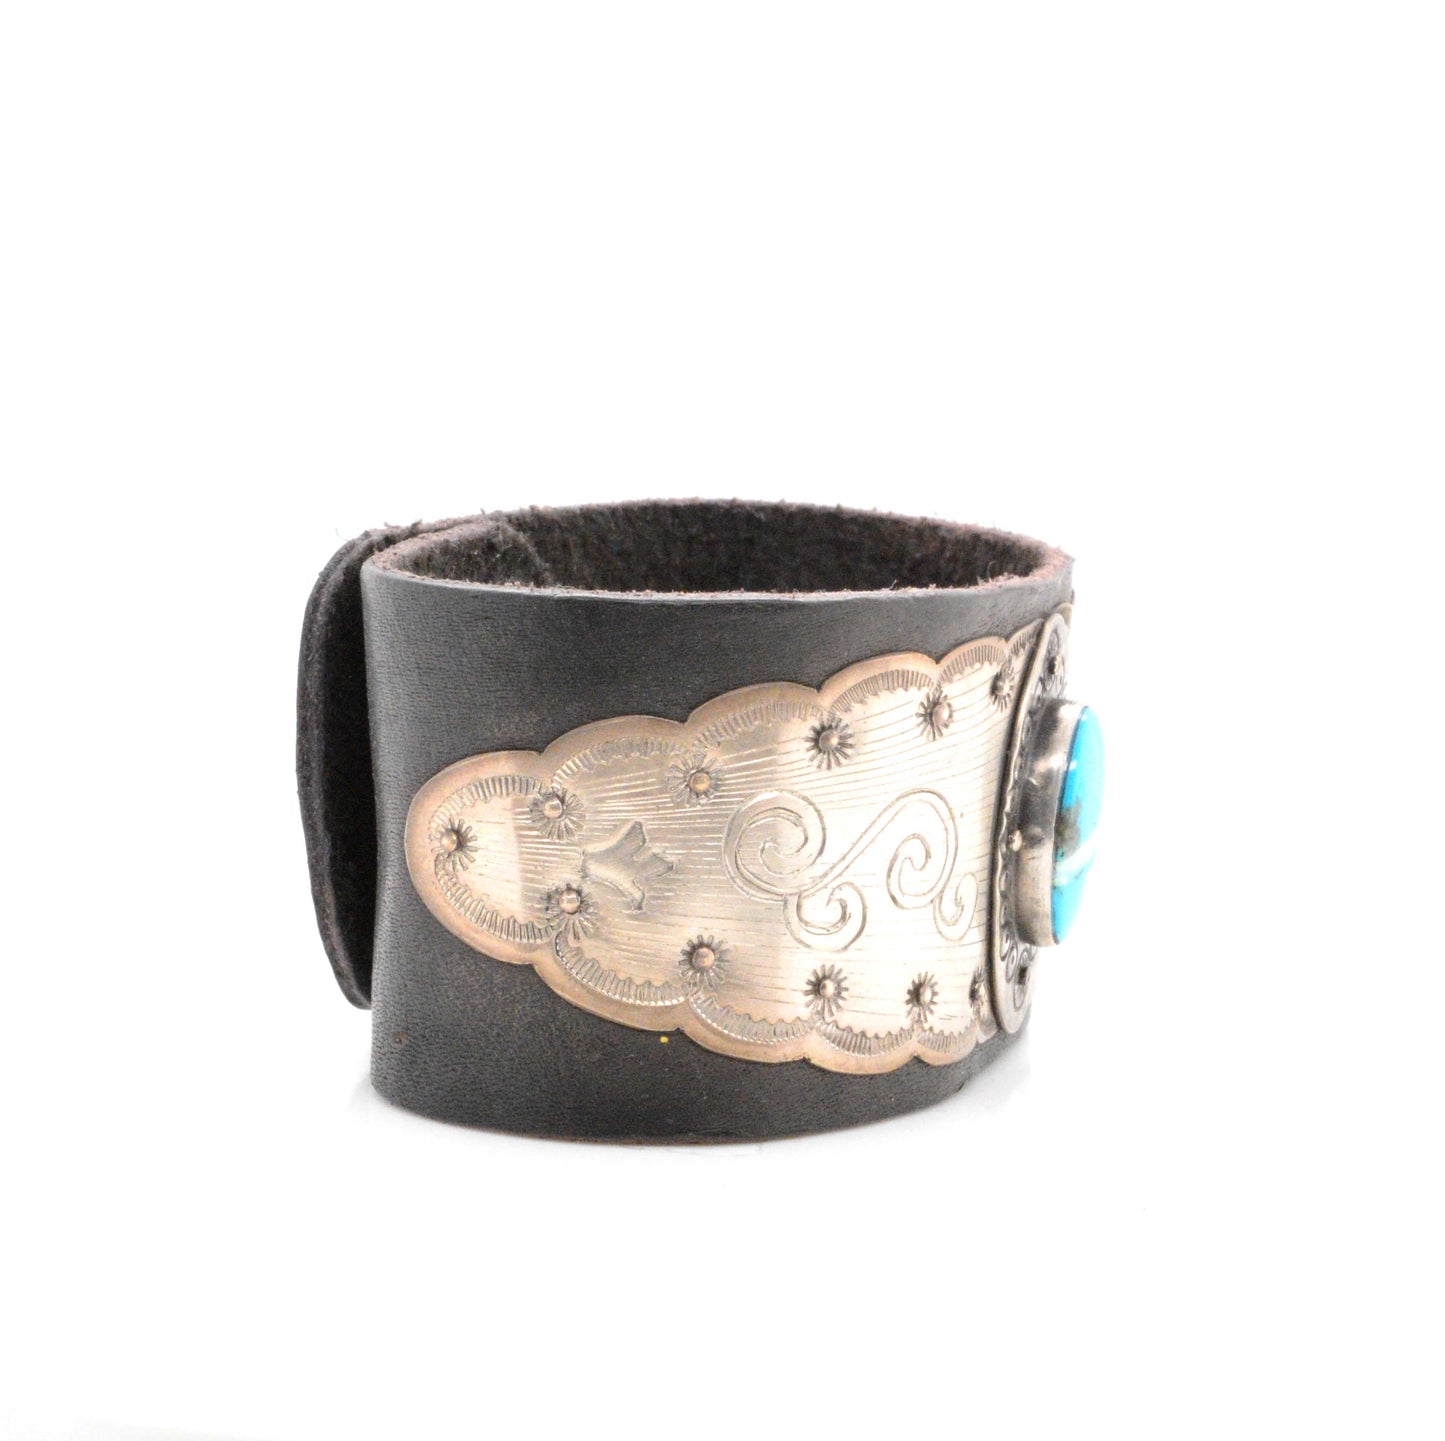 Black Leather Bracelet Accented With A Hand Engraved and Stamped Silver Design